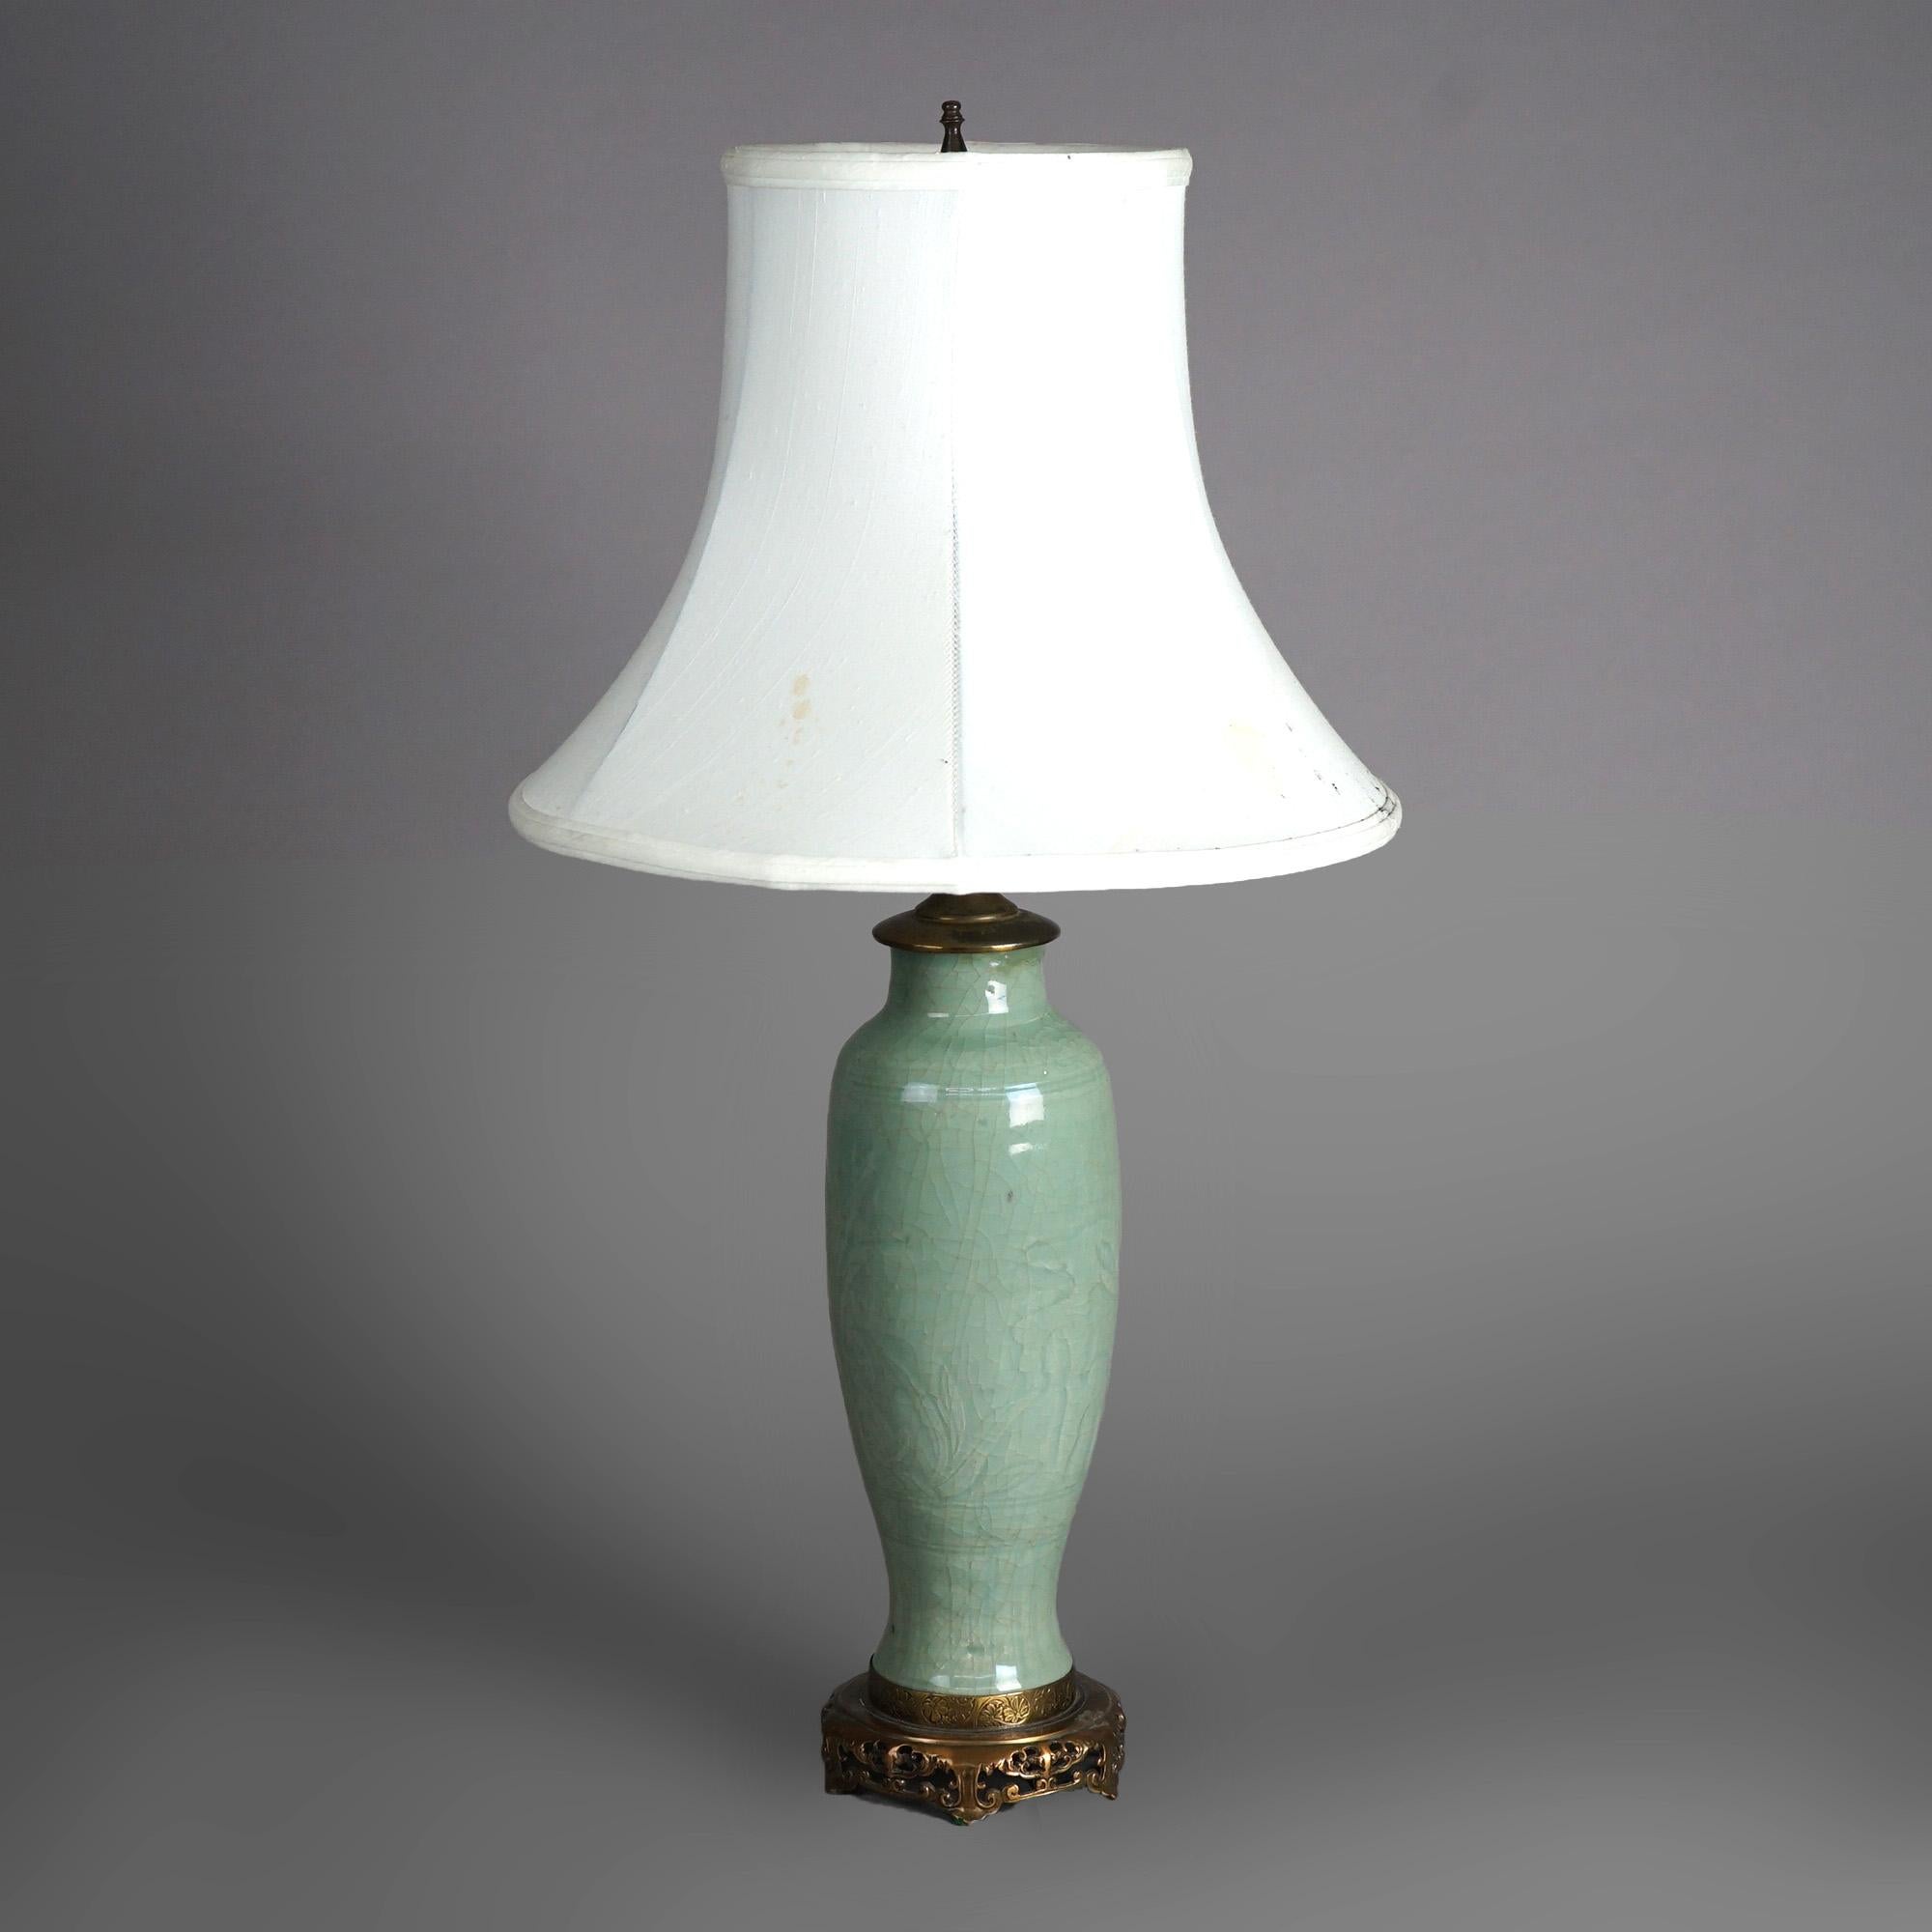 An antique table lamp offers Chinese art pottery vase with embossed foliate decoration and crazed celedon glazing, c1930

Measures - 27